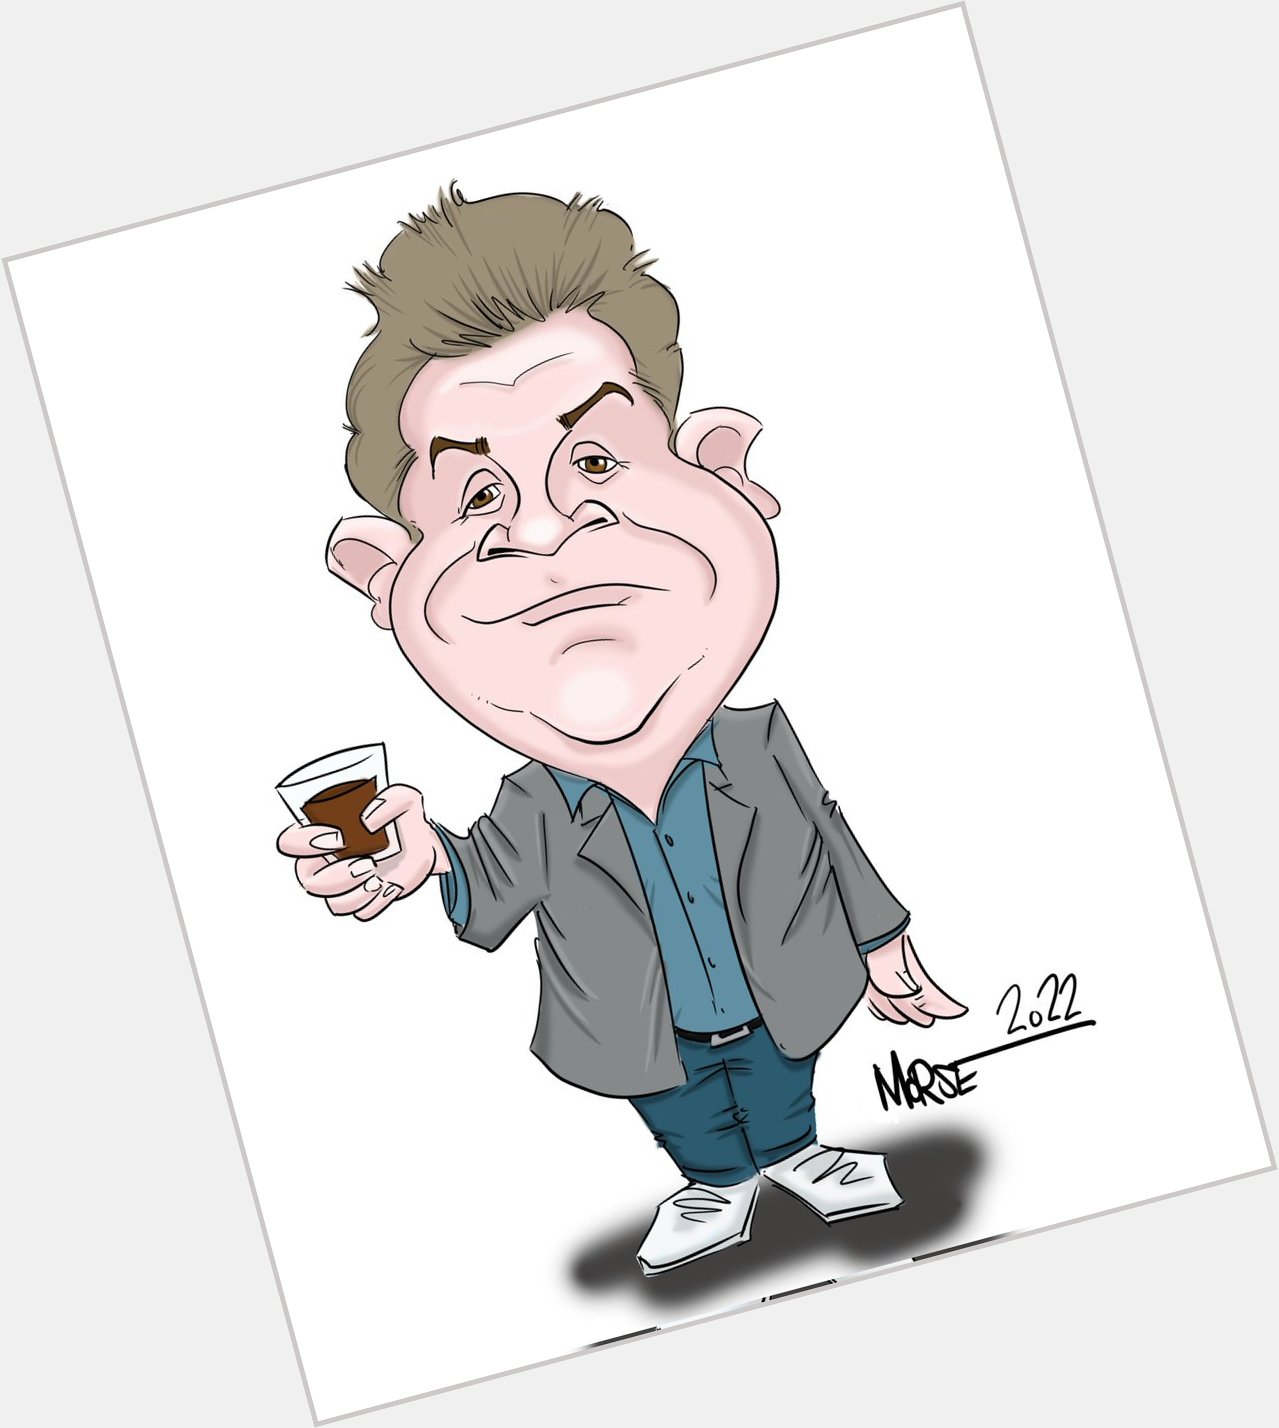 Happy Birthday to Patton Oswalt! Hey, anybody want a caricature? Message me!  